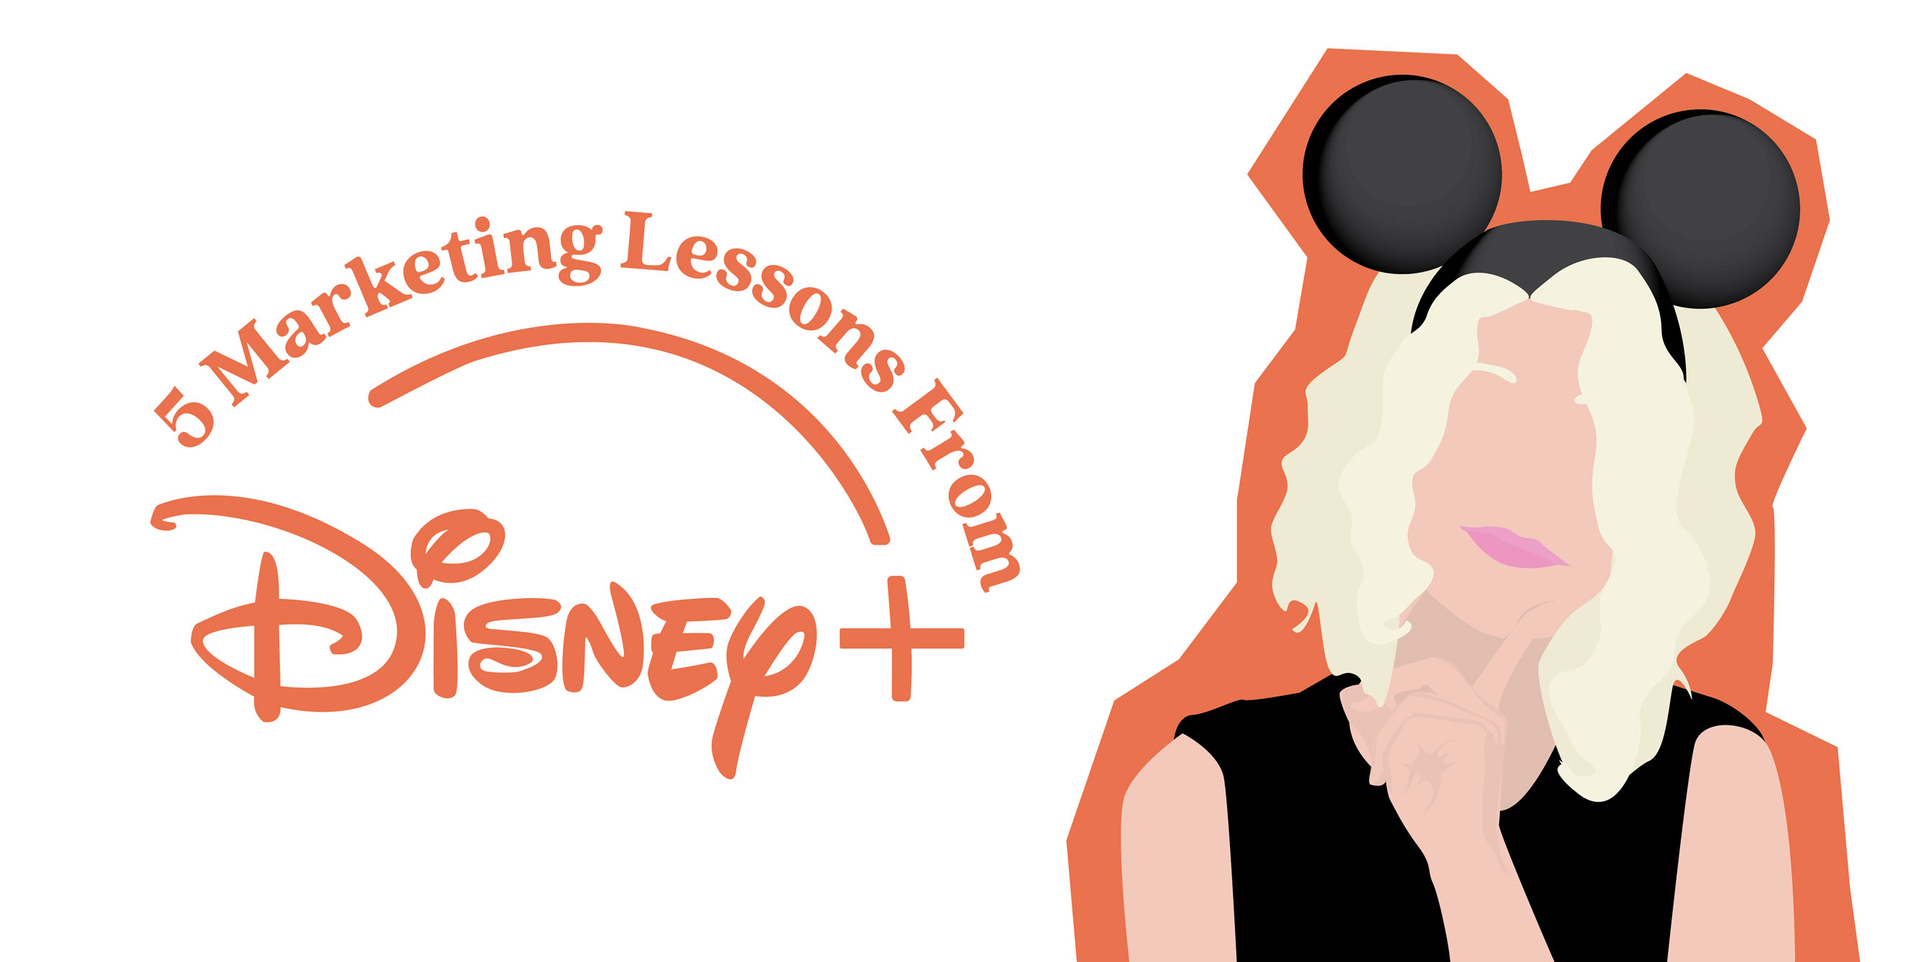 5 Marketing Lessons From Disney+